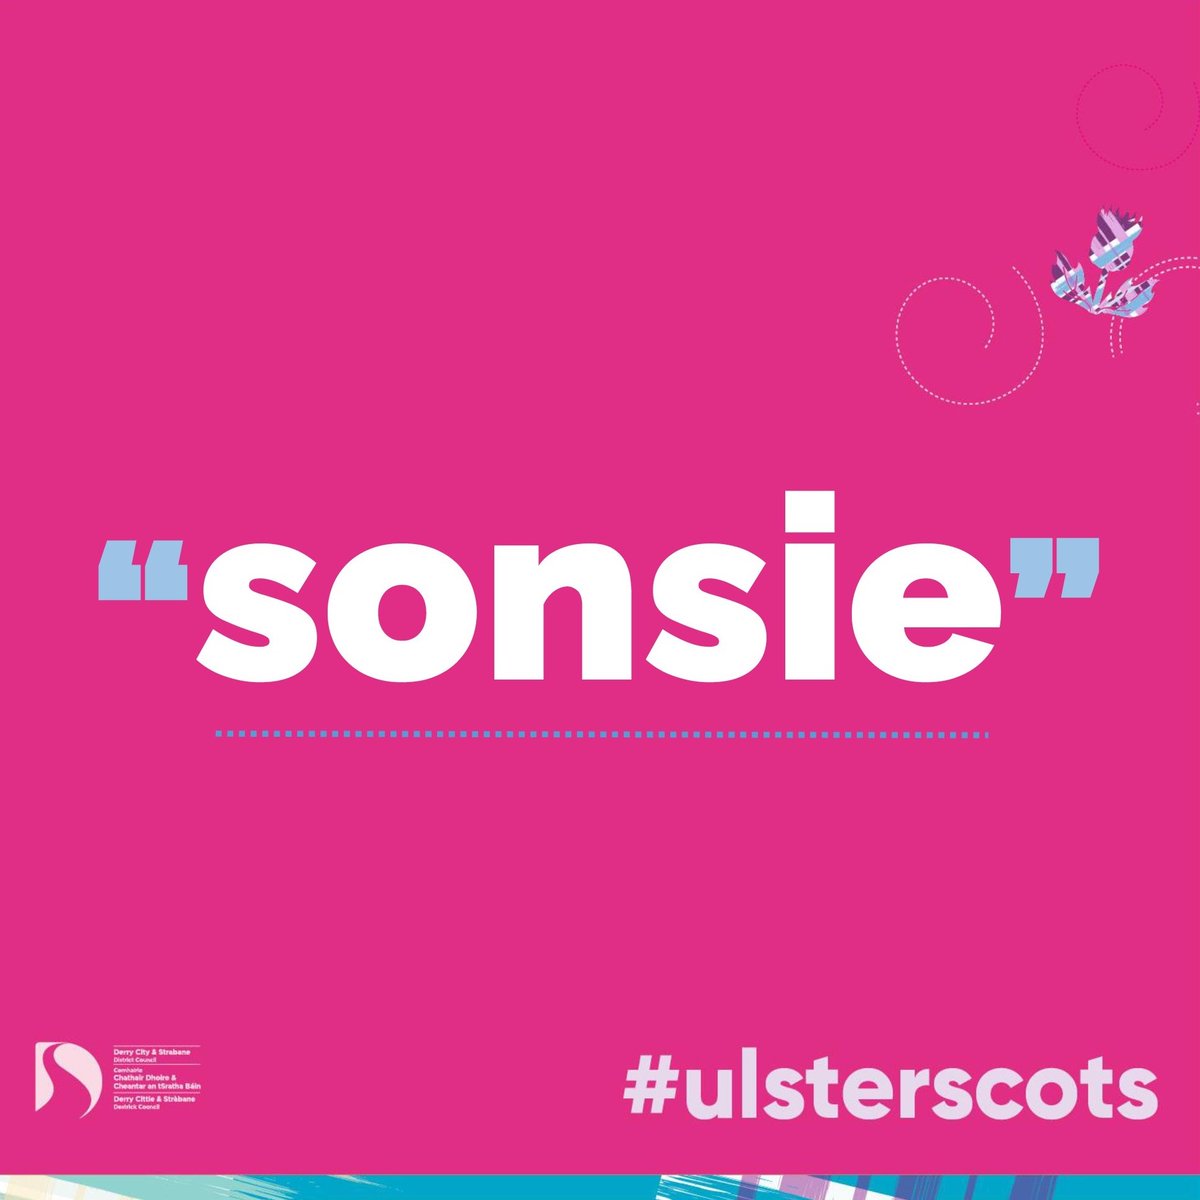 Sonsie (adj): used to describe a person who is pleasant, jolly, or pretty. From Old Scots ‘sonsy’ meaning lucky, possibly derived from the Irish Gaelic ‘sonas’ meaning happiness and good-luck #UlsterScots #Scots #Gaelic